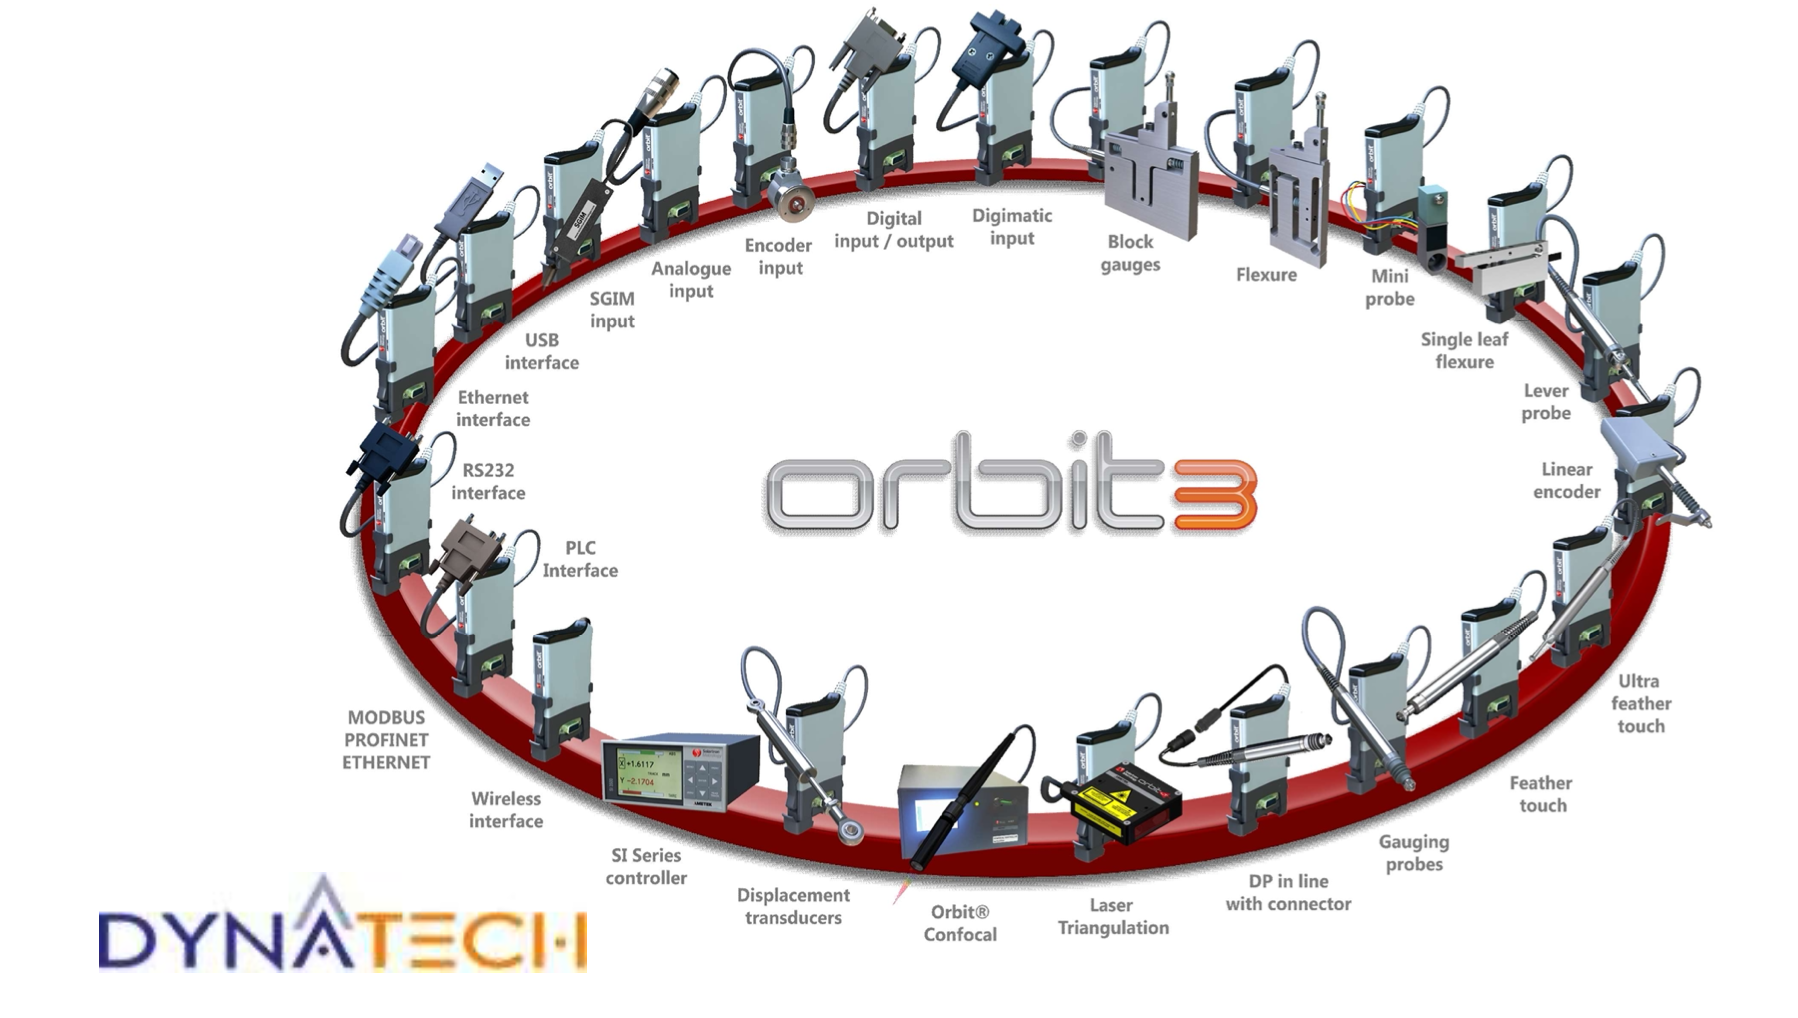 Orbit 3 – The Total Measurement System from Solartron Metrology